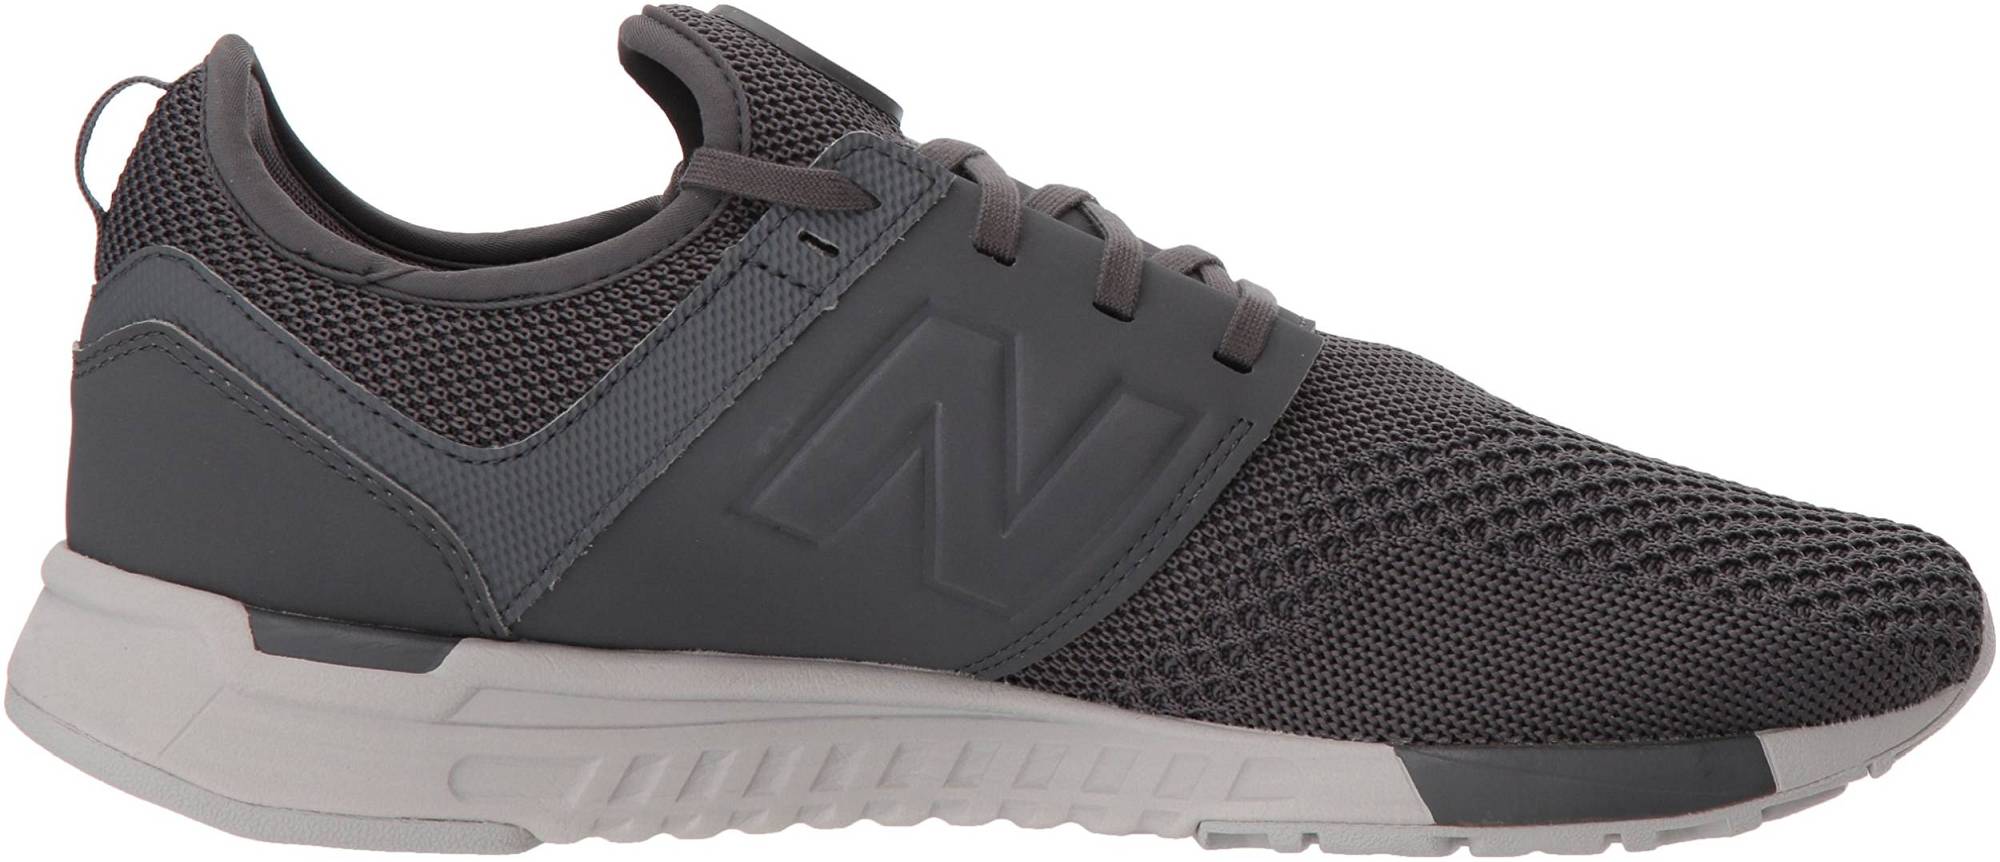 New Balance 247 Sport – Shoes Reviews & Reasons To Buy